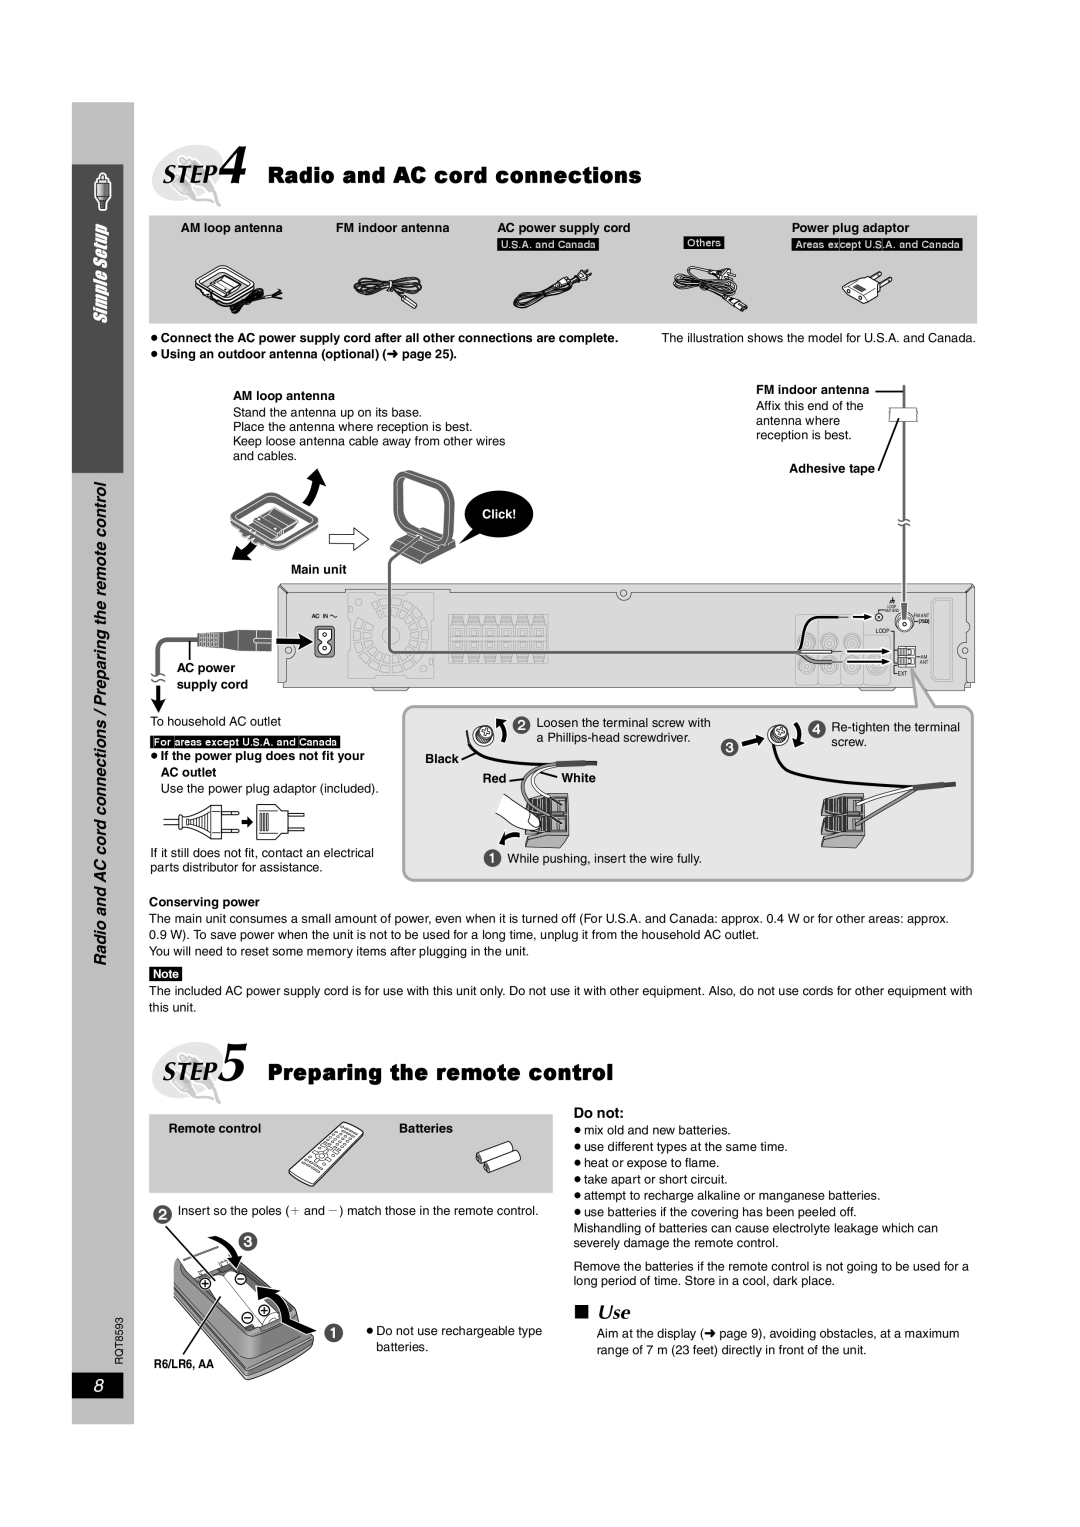 Panasonic SC-HT440 manual Radio and AC cord connections, Preparing the remote control, Use, Simple Setup, Do not, Others 